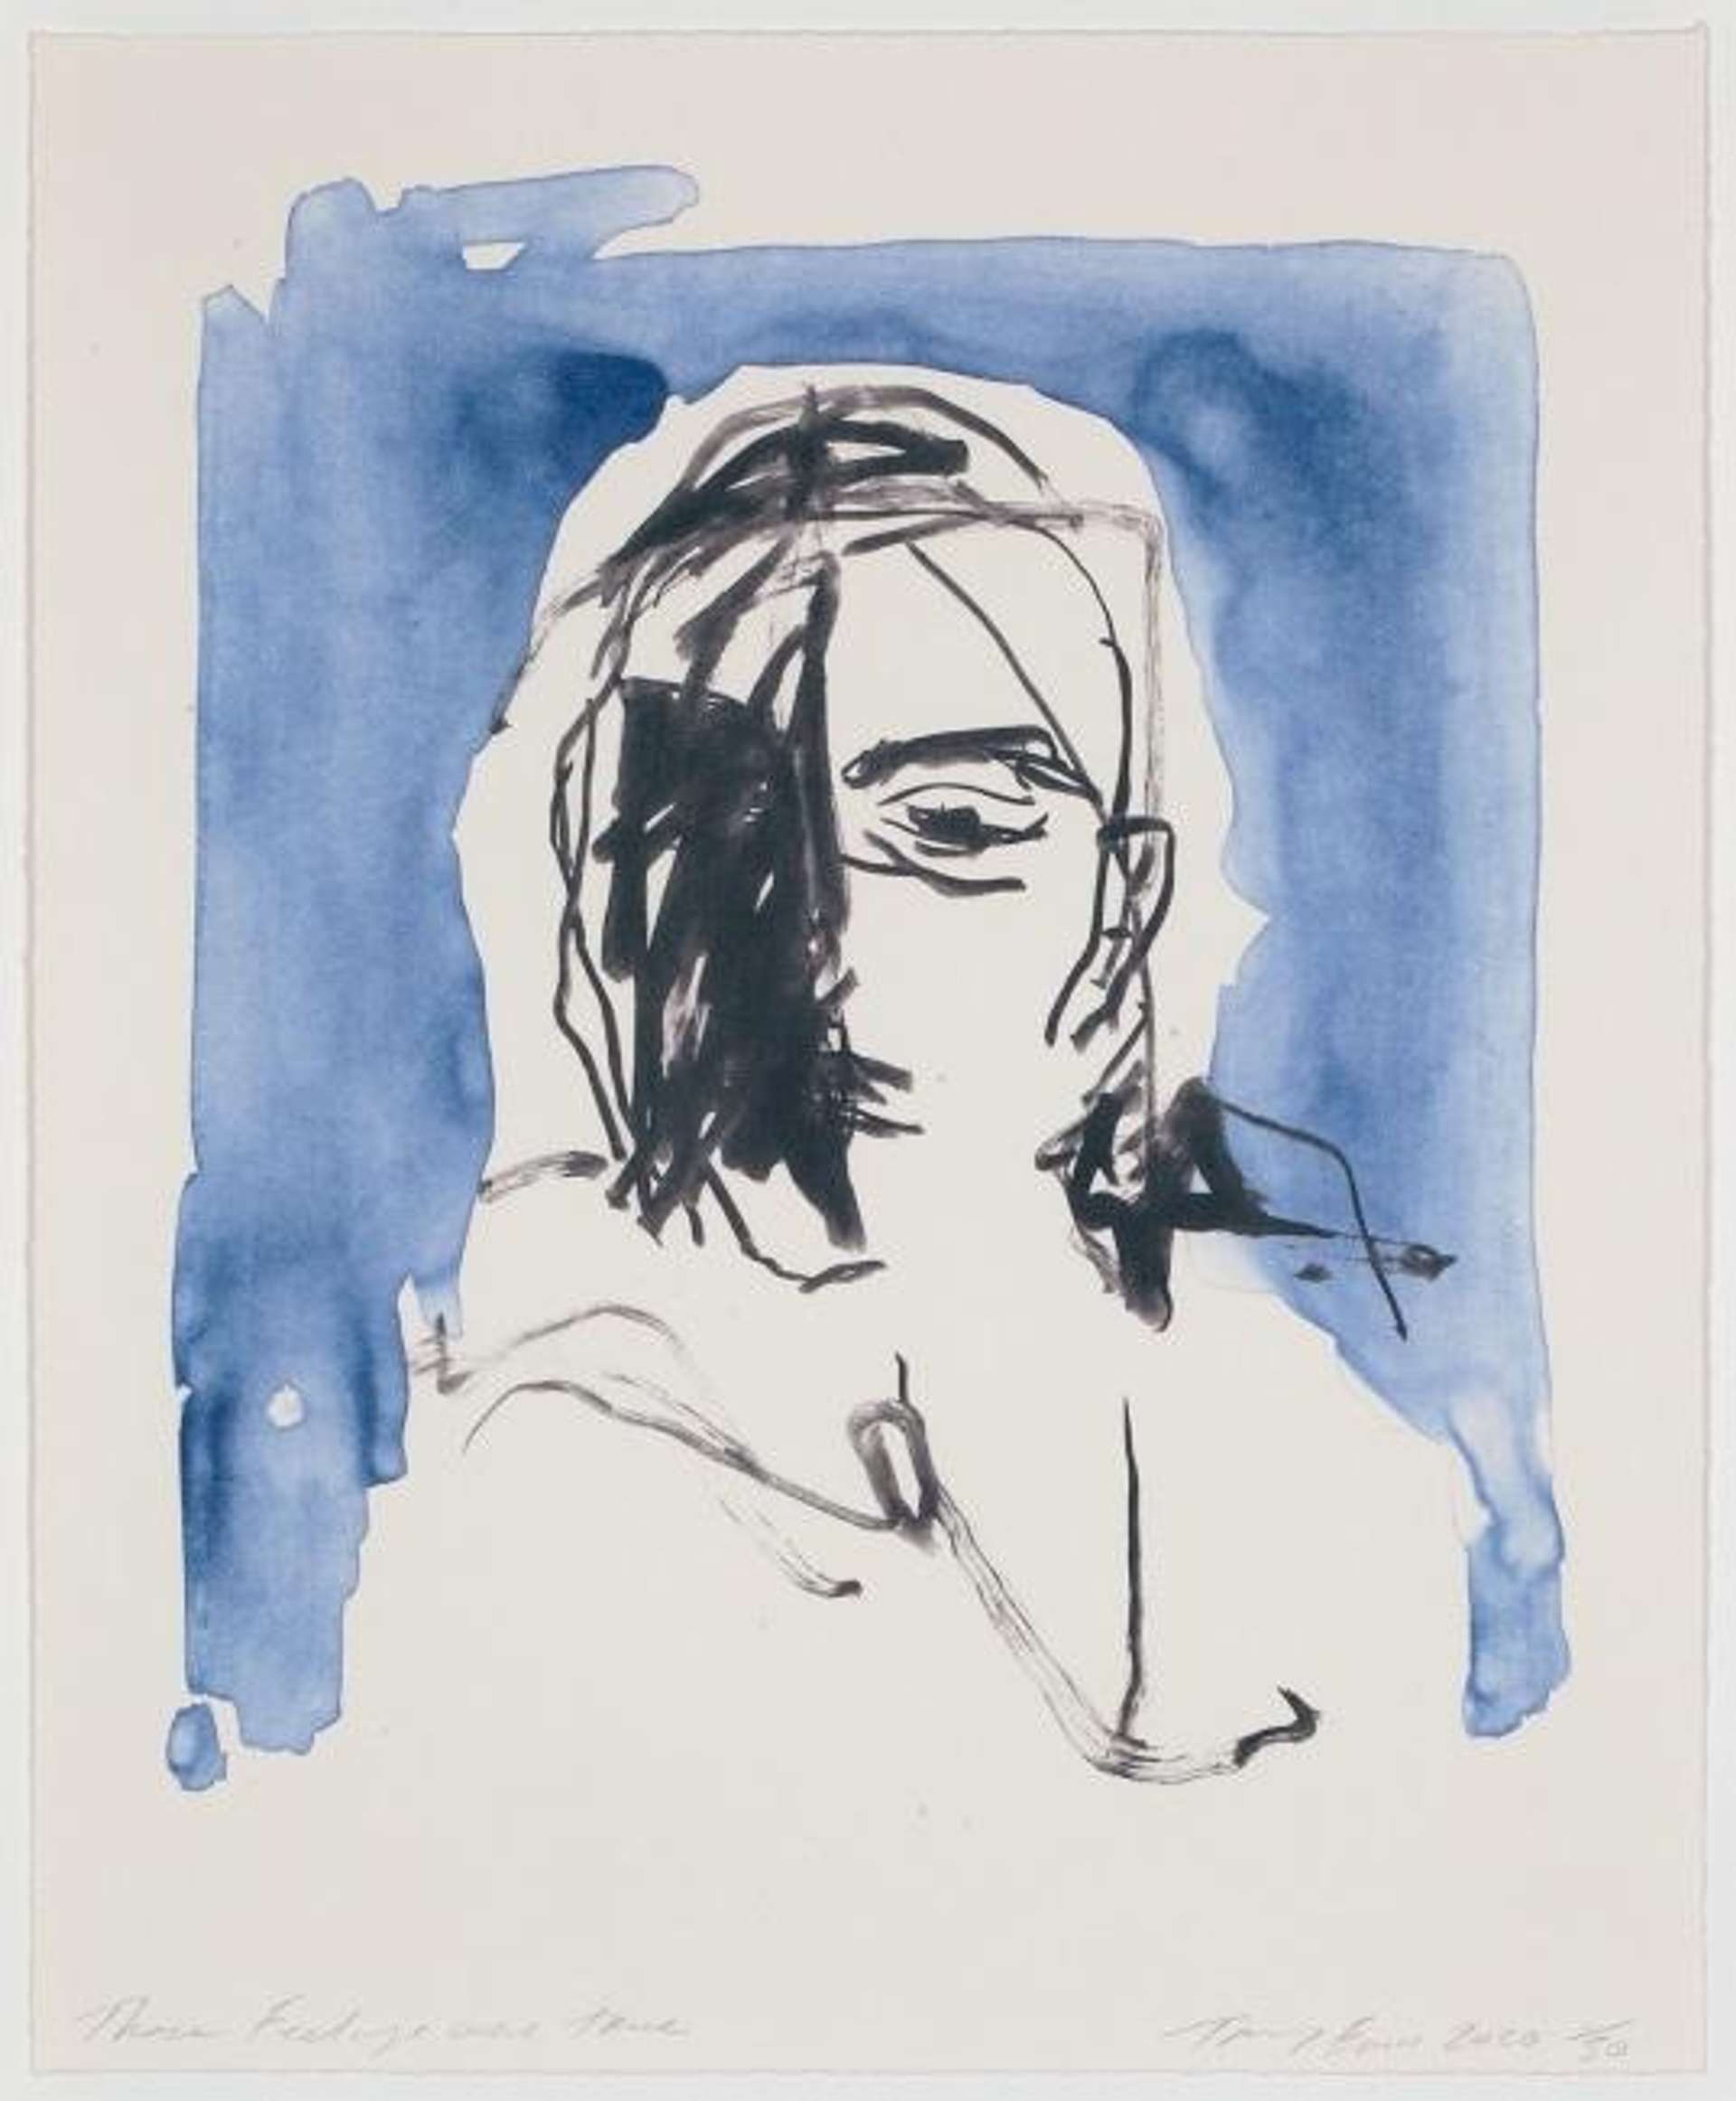 A lithograph by Tracey Emin showing her self portrait against a wash of blue ink.